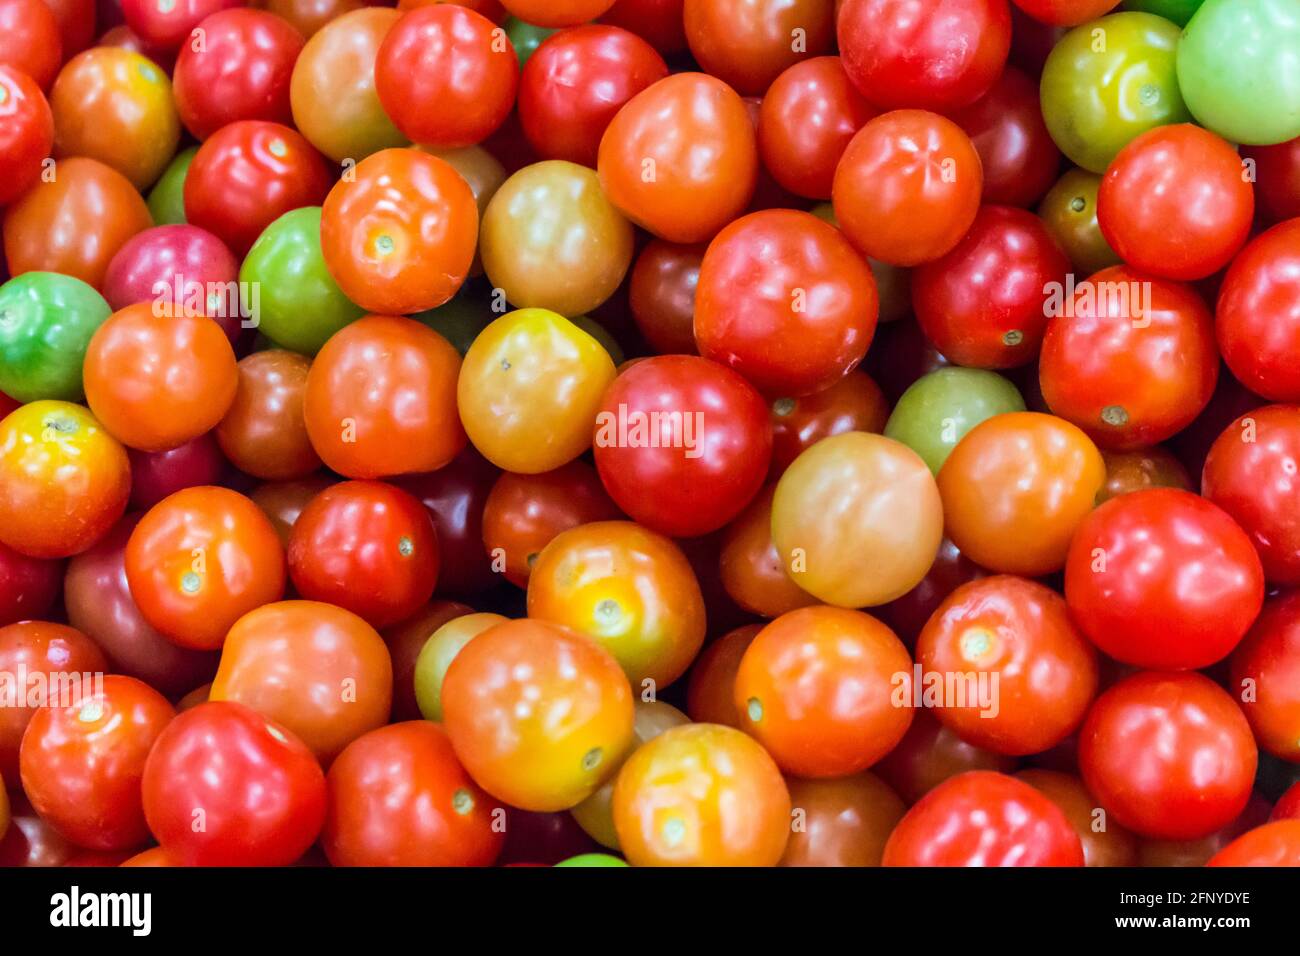 Alot of colorful tomatoes background Stock Photo